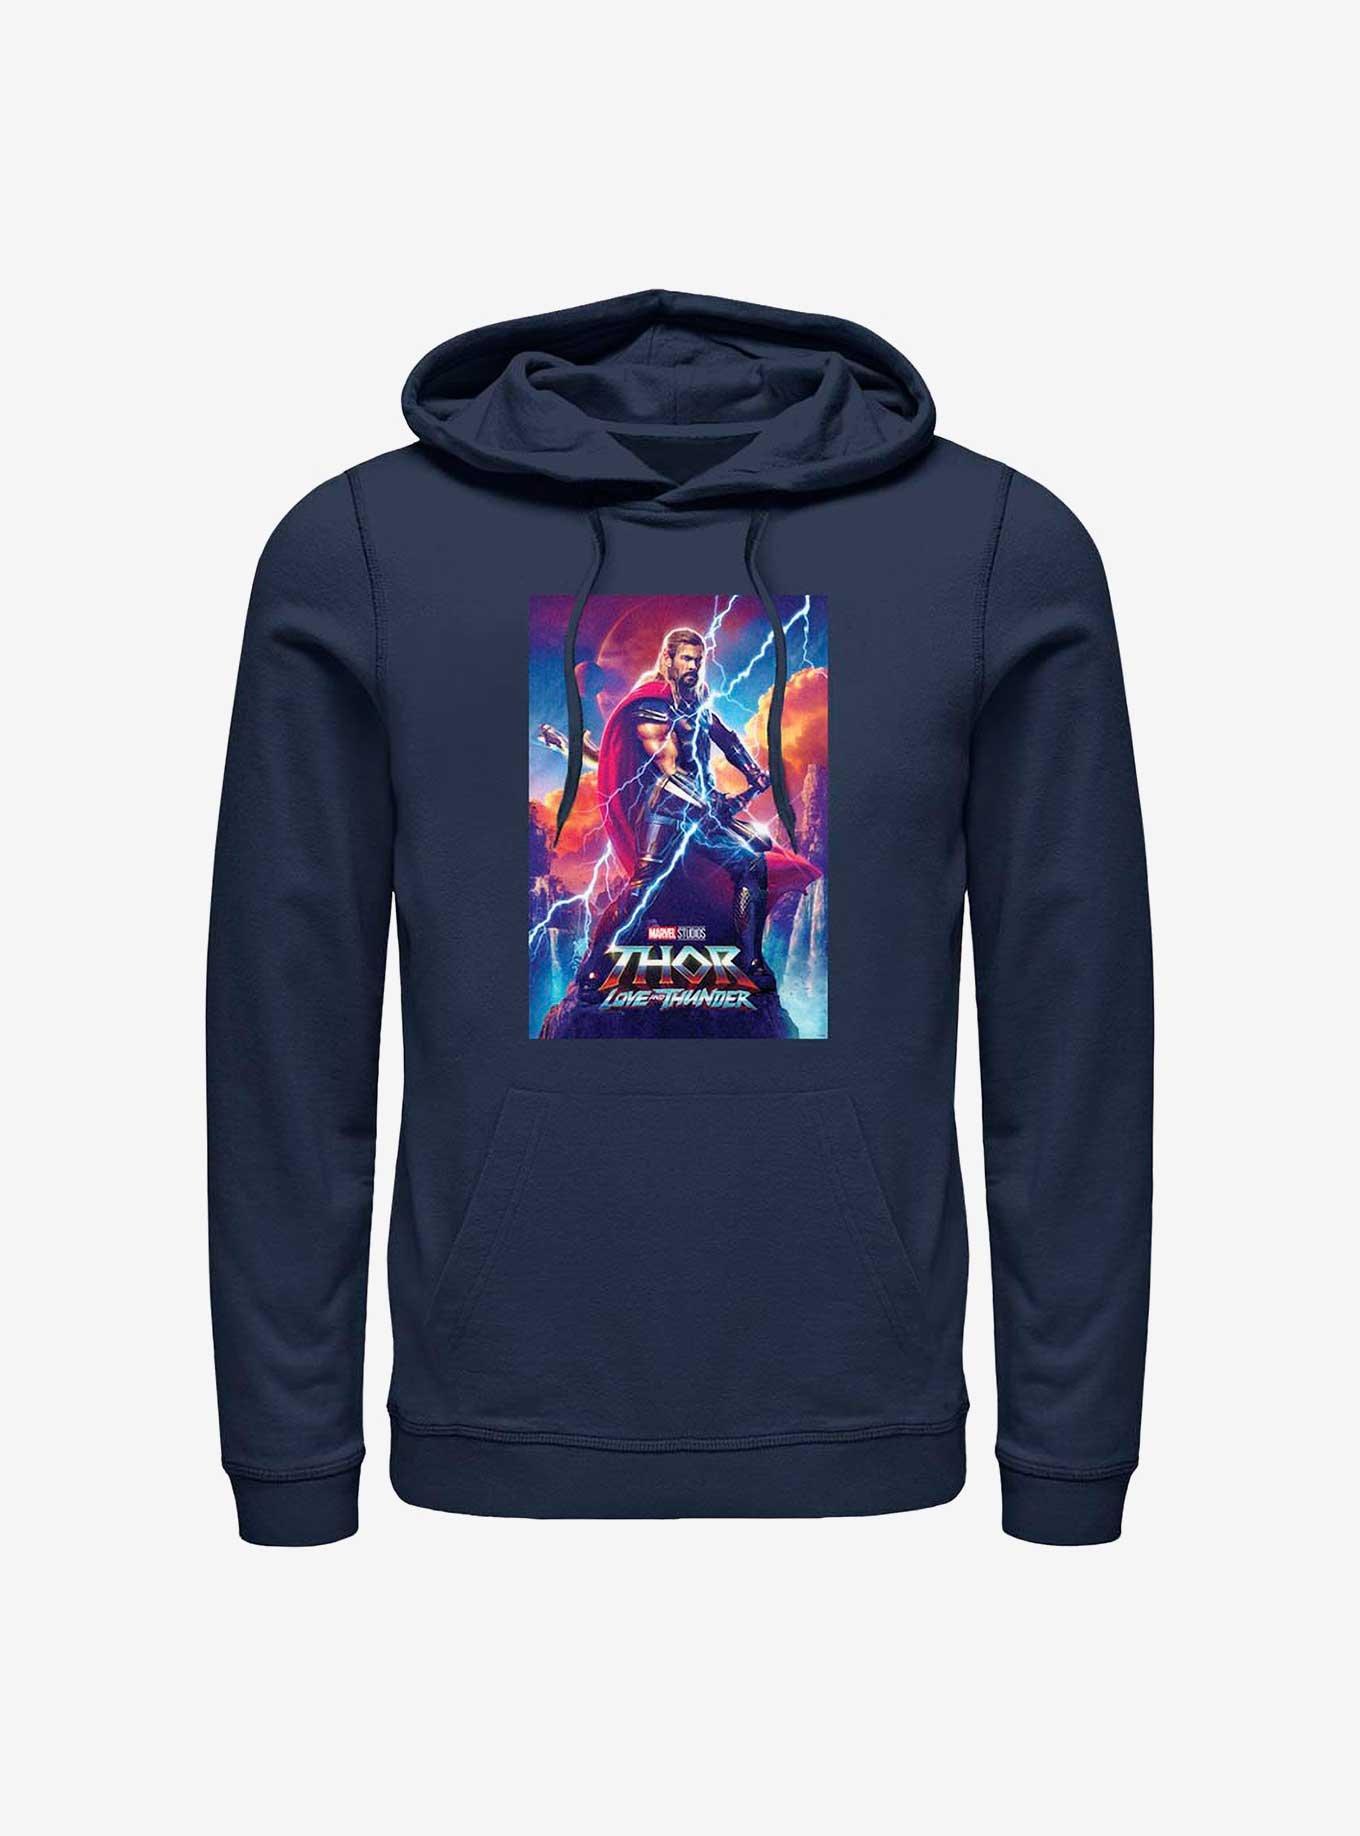 Marvel Thor: Love and Thunder Asgardian Movie Poster Hoodie, NAVY, hi-res